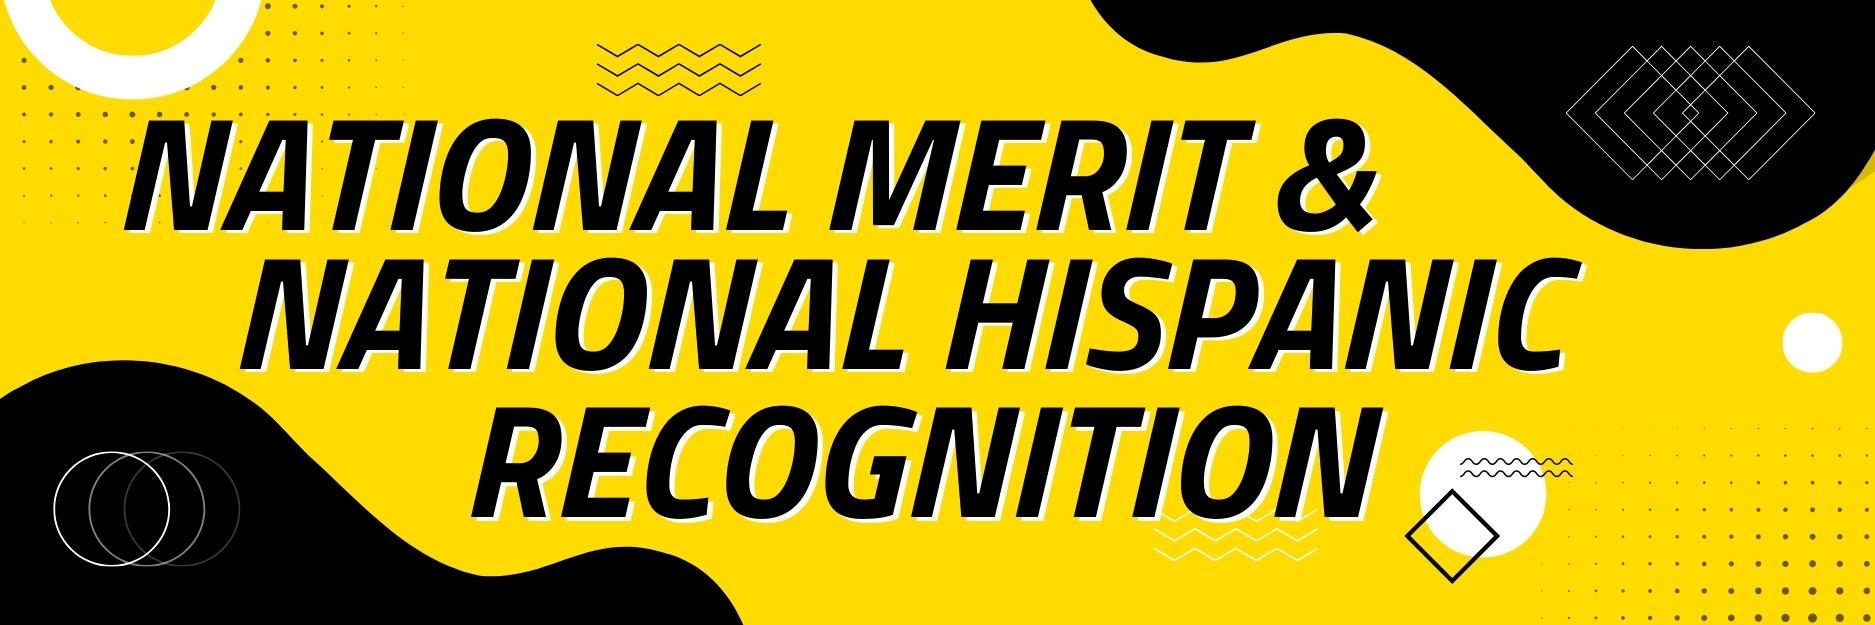 Decorative graphic for National Merit and National Hispanic Recognition